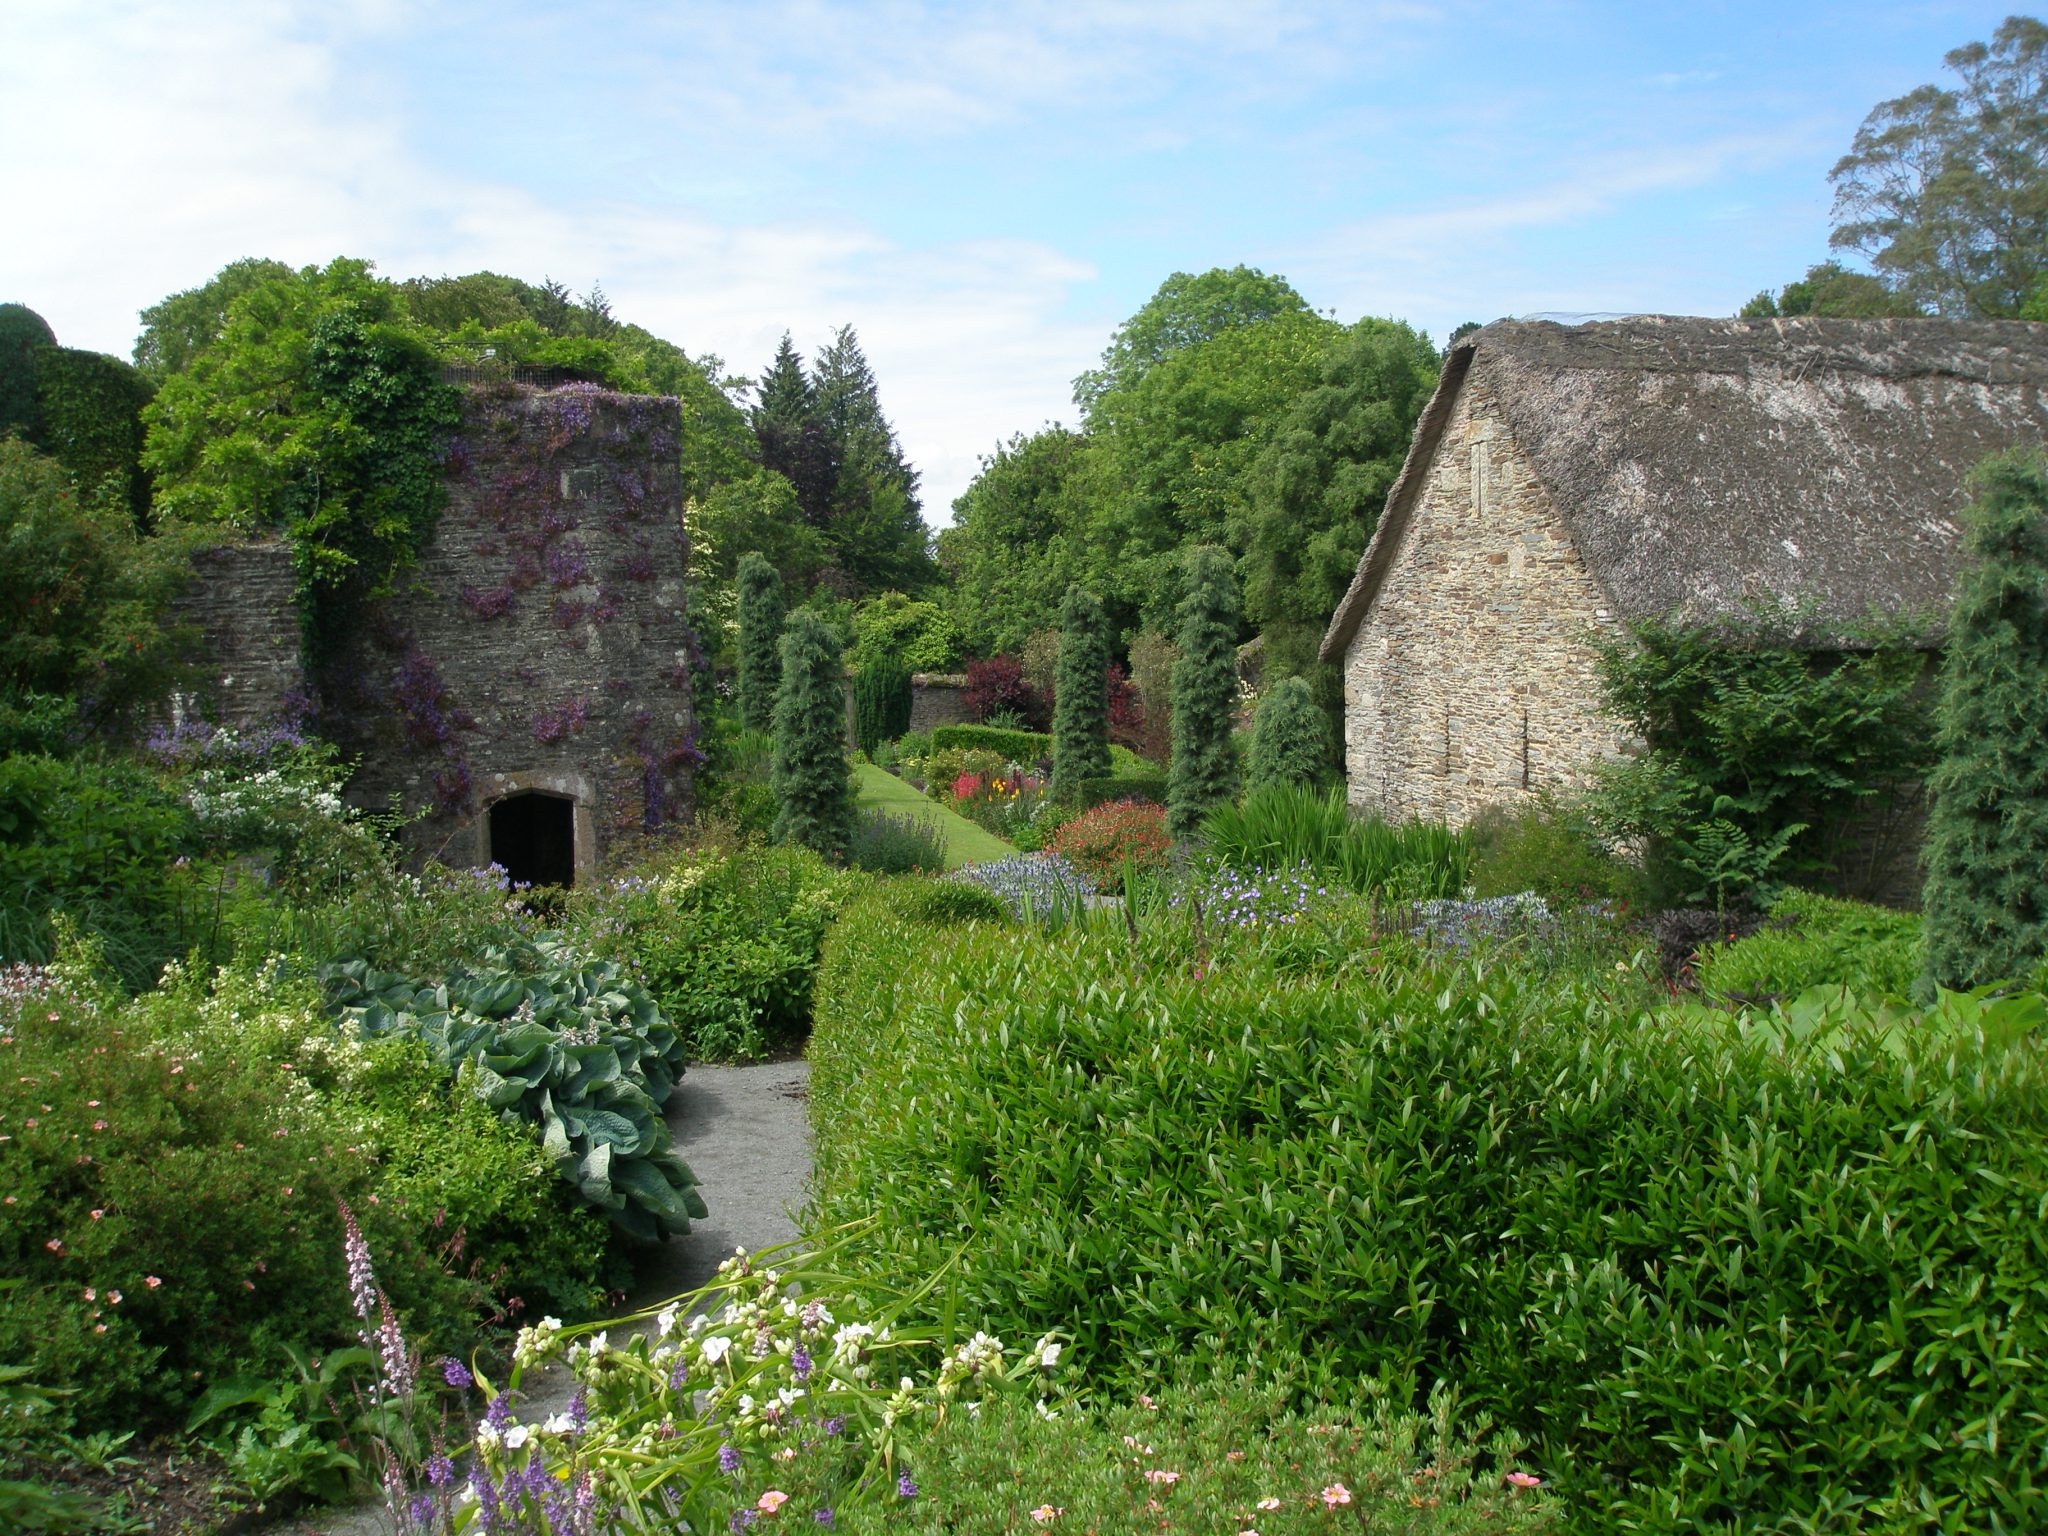 The Tower Ruins, and Bottom Terrace Garden.